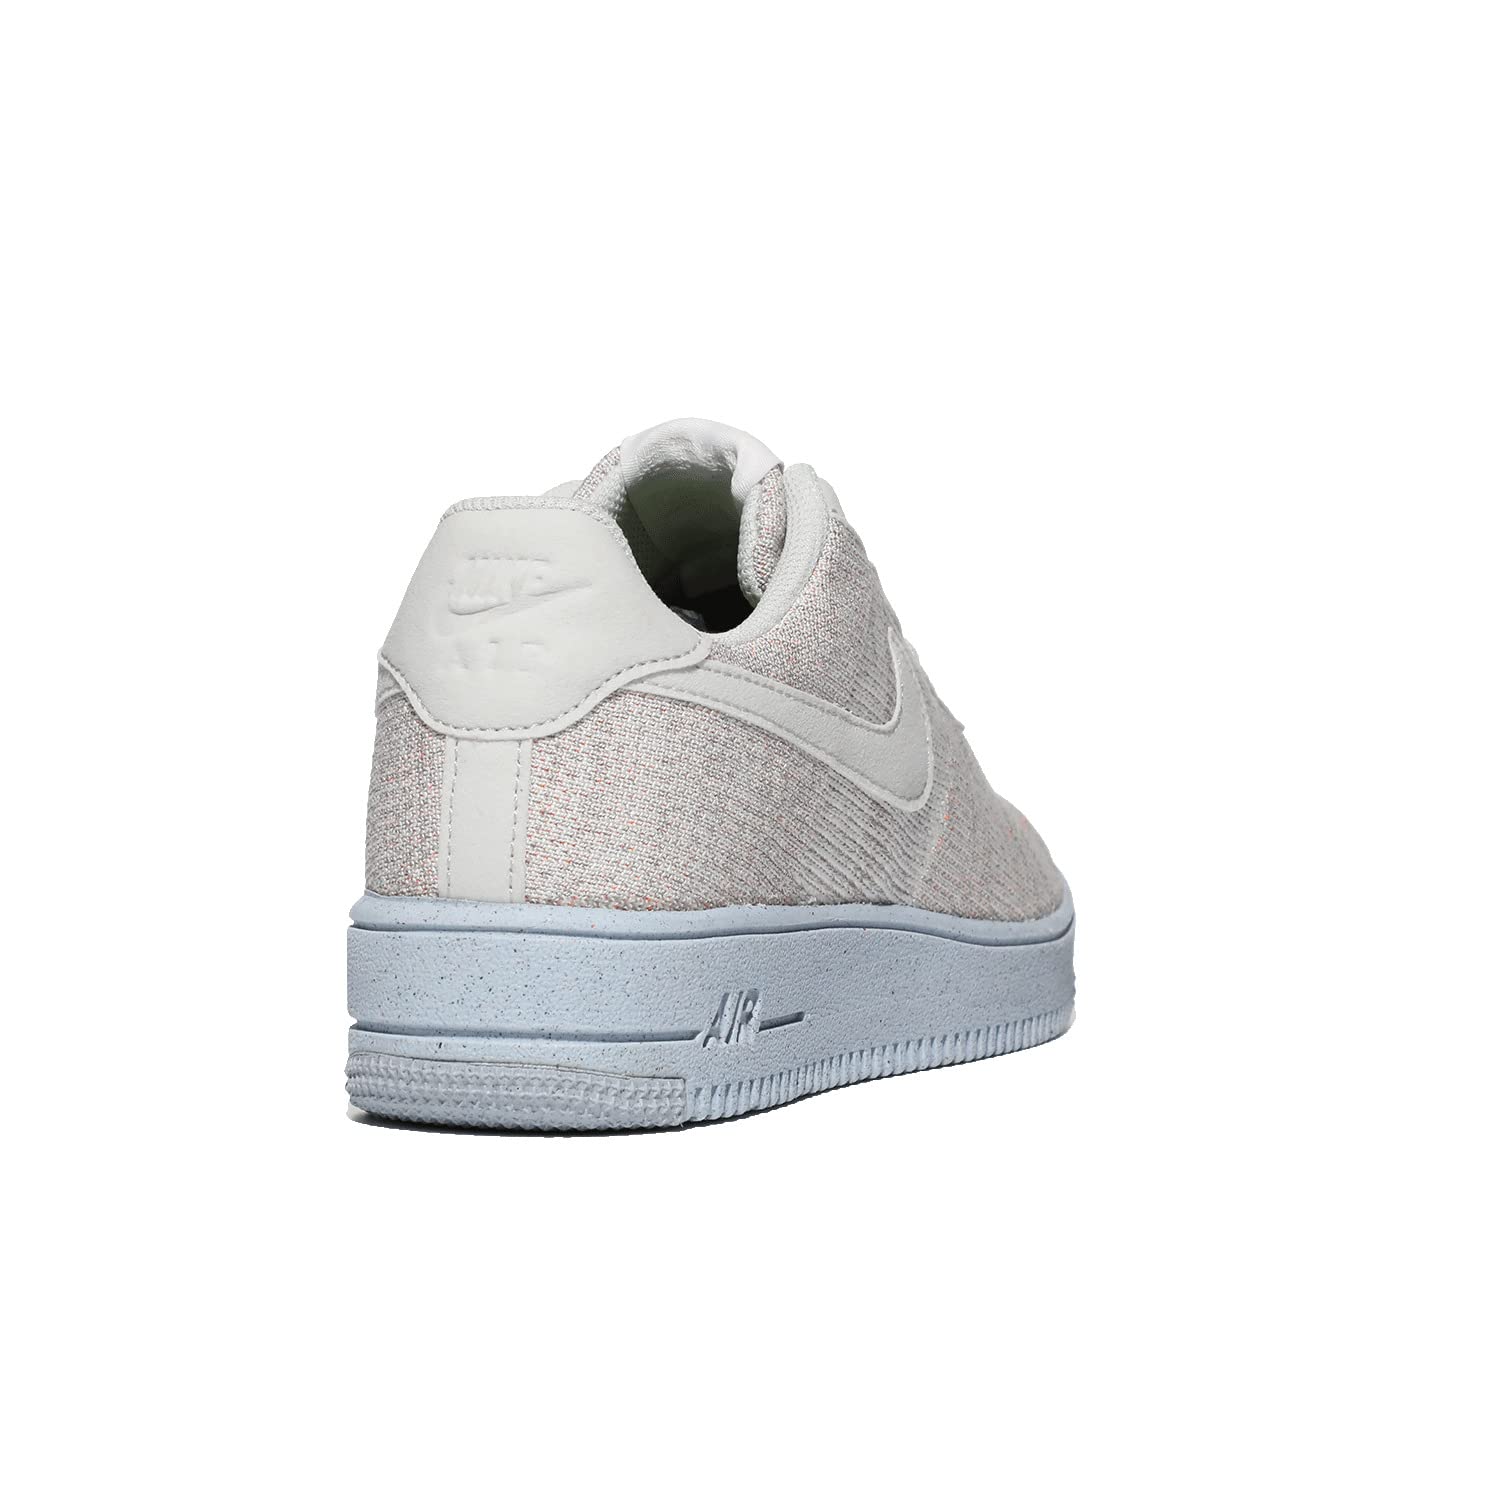 Image 4 of Air Force 1 Crater Flyknit (Big Kid)